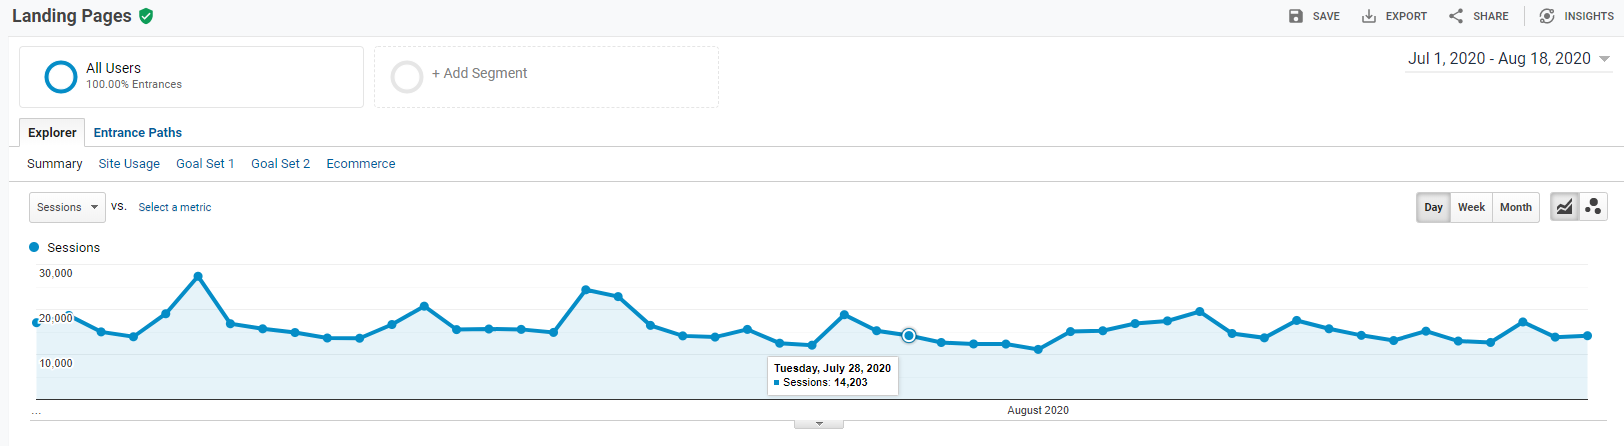 The Landing Pages traffic graph